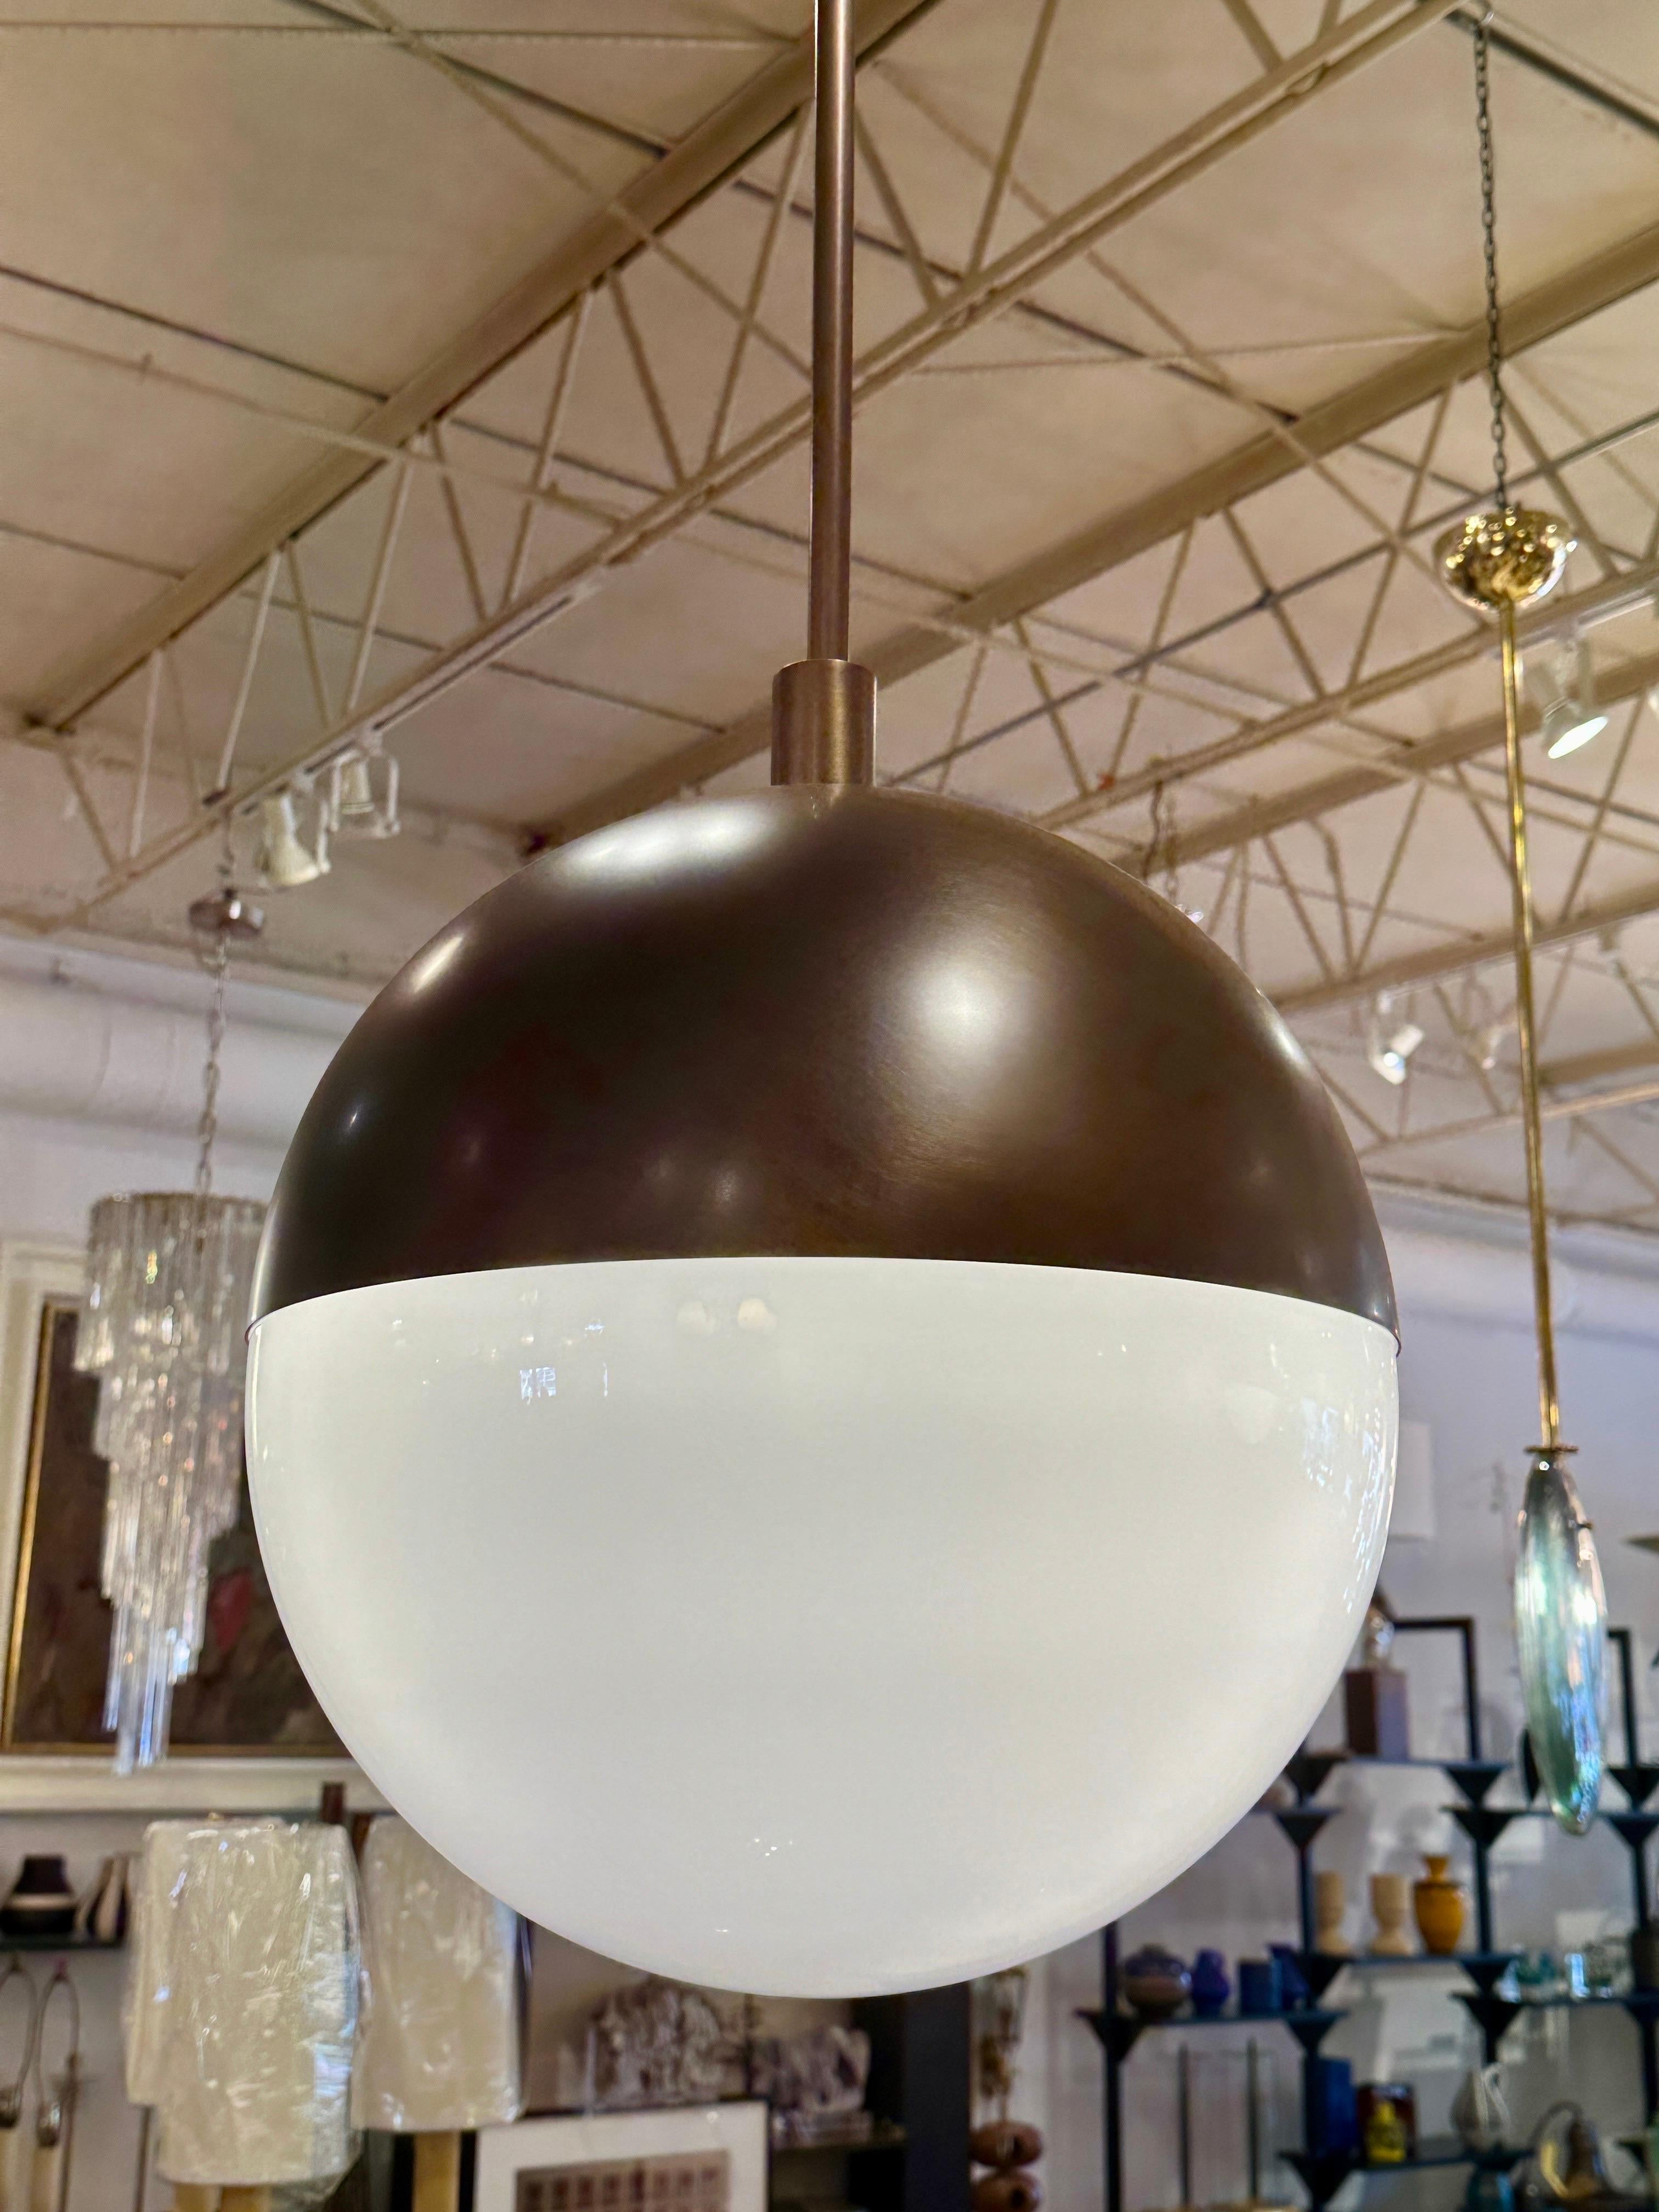 This wonderful Italian bronze and white glass globe shaped pendant light is so classic with its half dome in satin bronze finish and the lower dome in Murano white glass.  A single bulb to interior provides plenty of light and the rod and canopy can